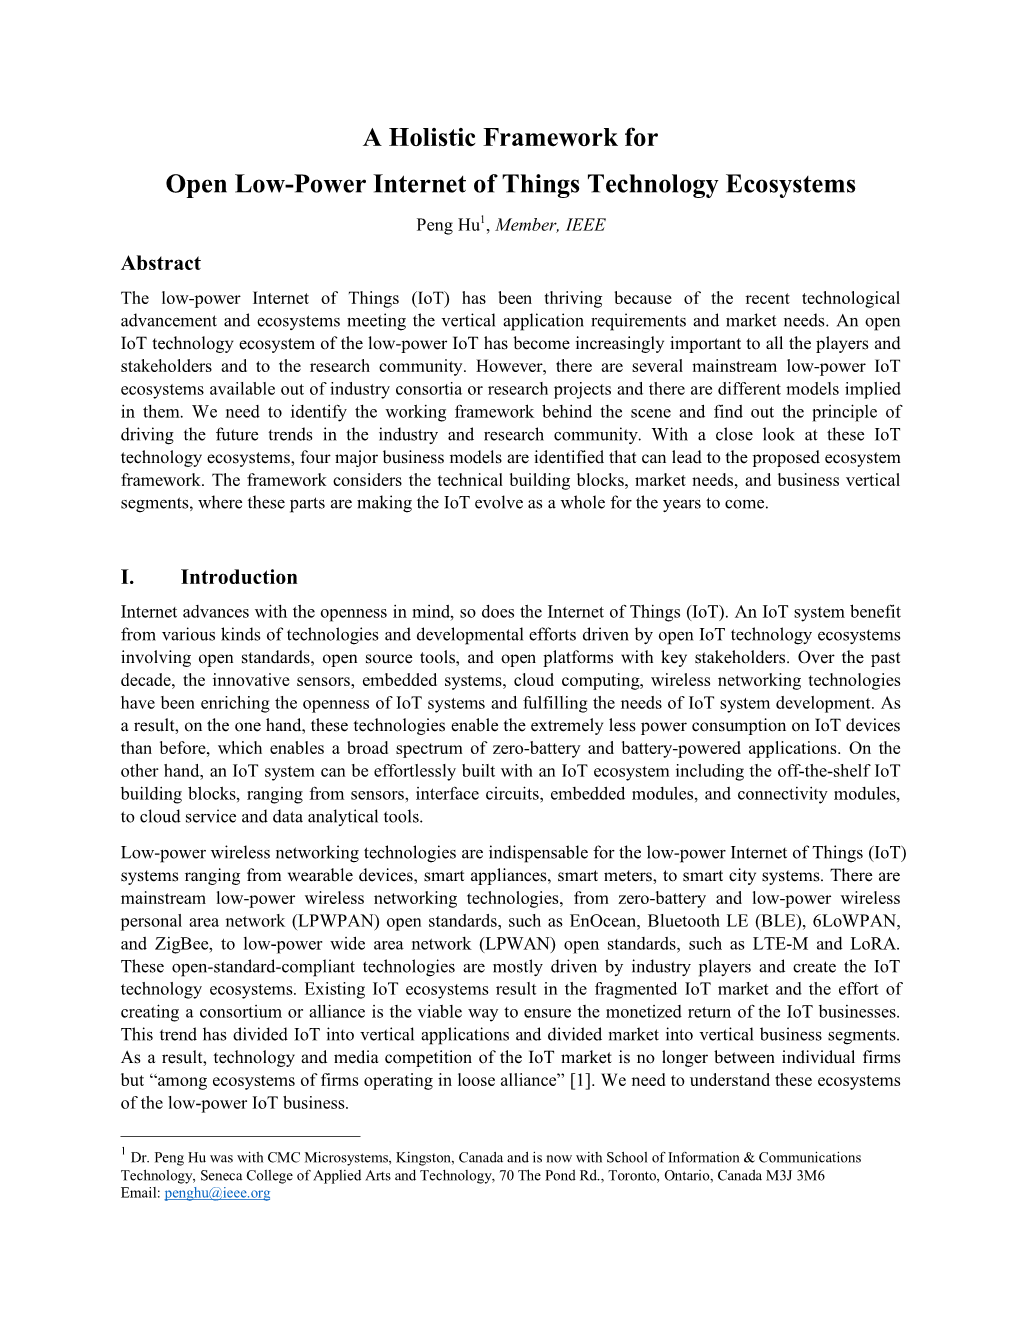 A Holistic Framework for Open Low-Power Internet of Things